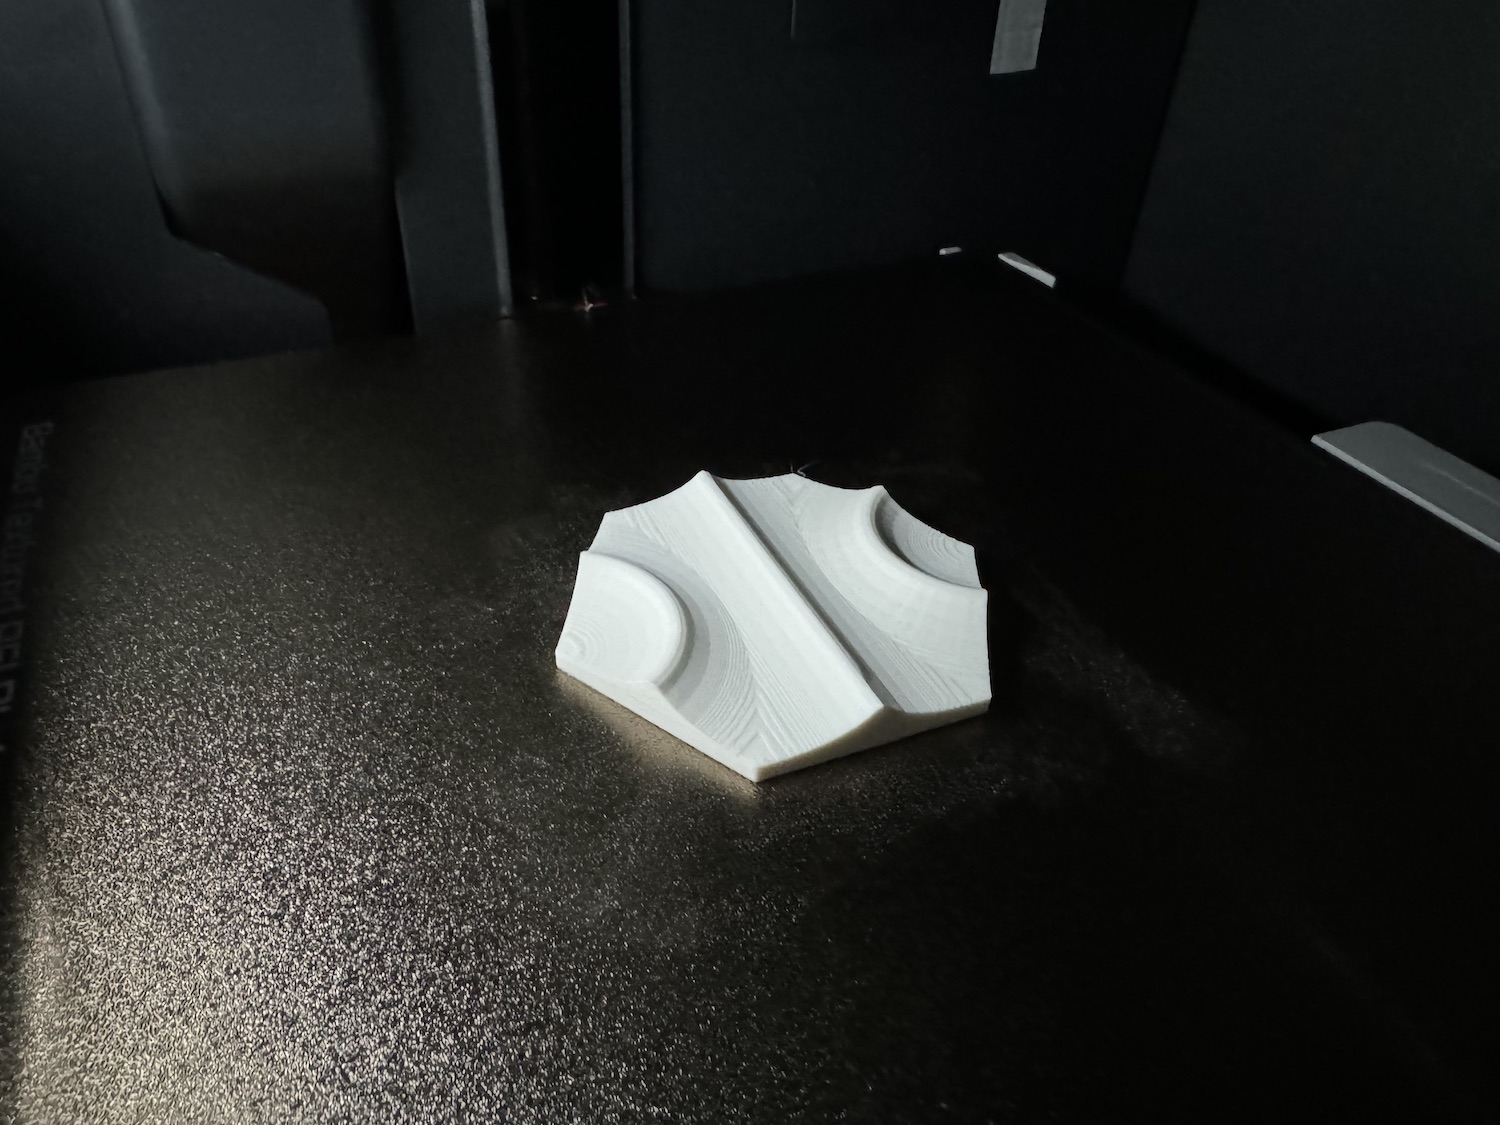 3D Printing the Tile